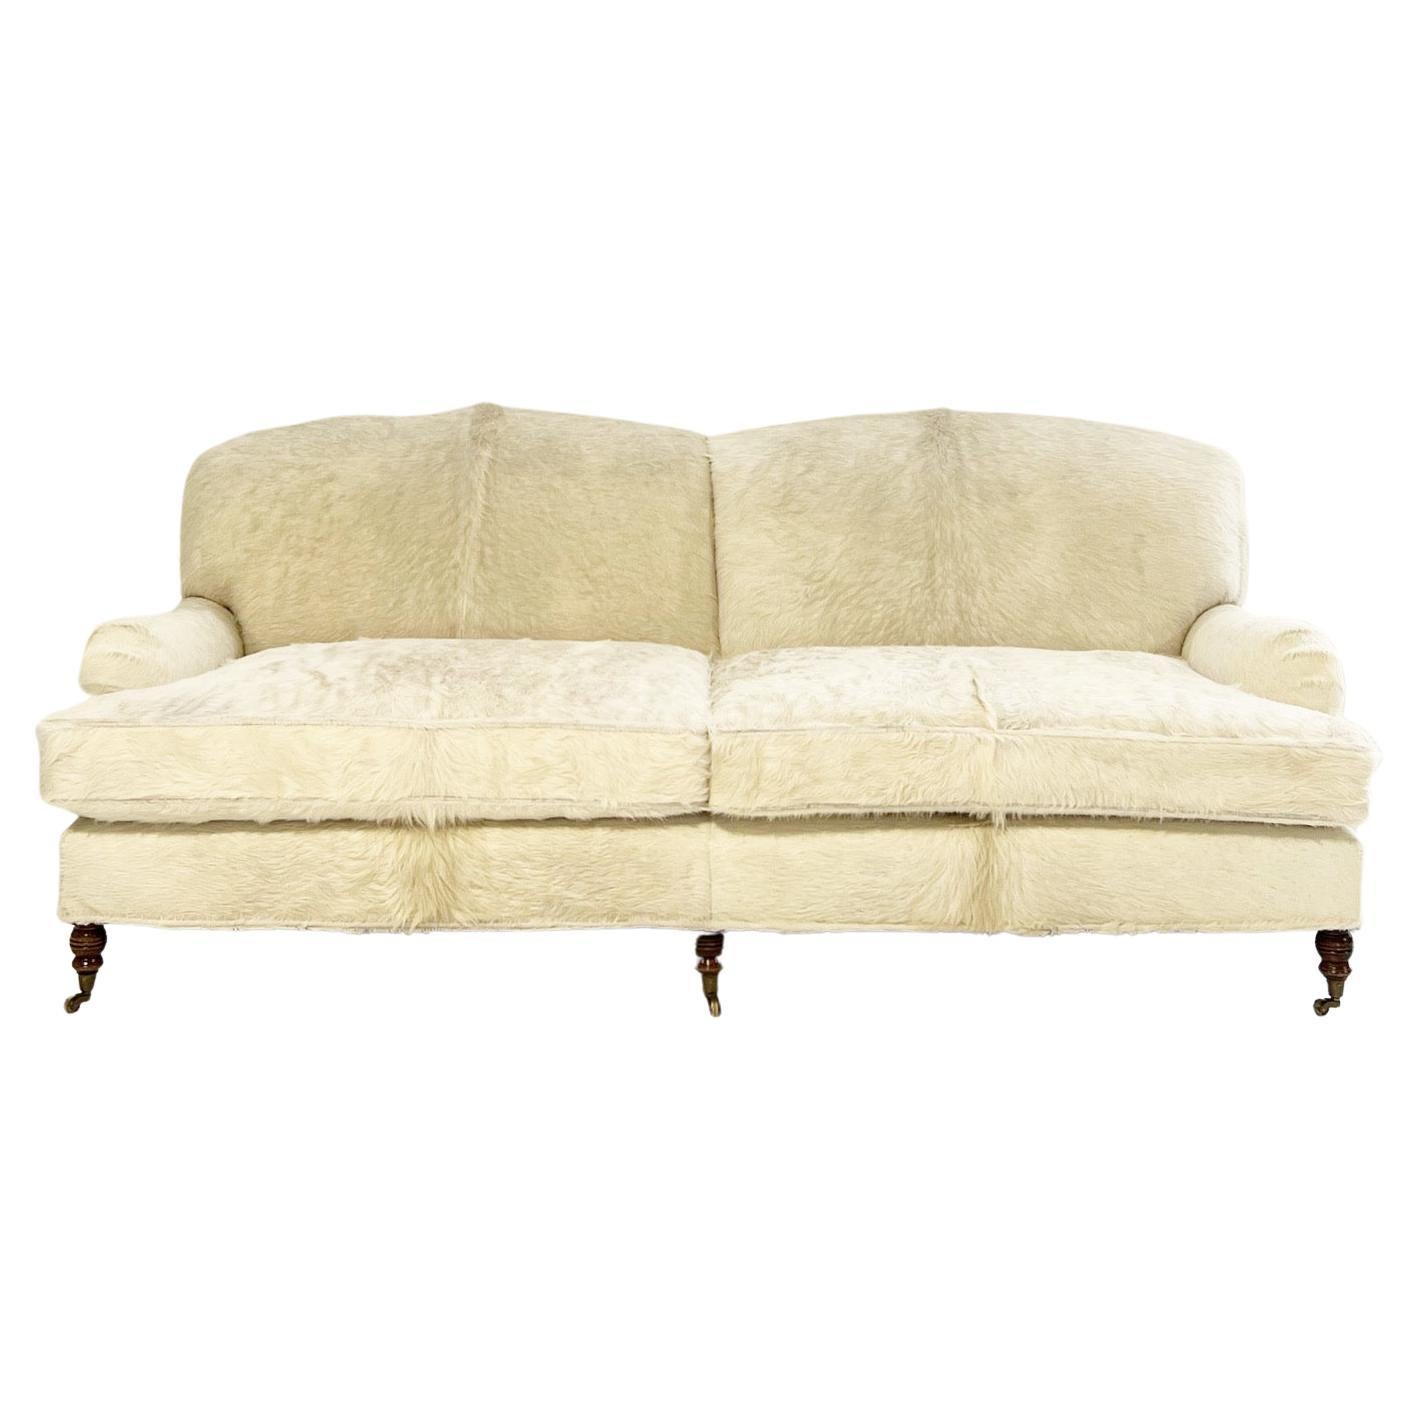 ON HOLD Vintage George Smith Signature Sofa Restored in Brazilian Cowhides